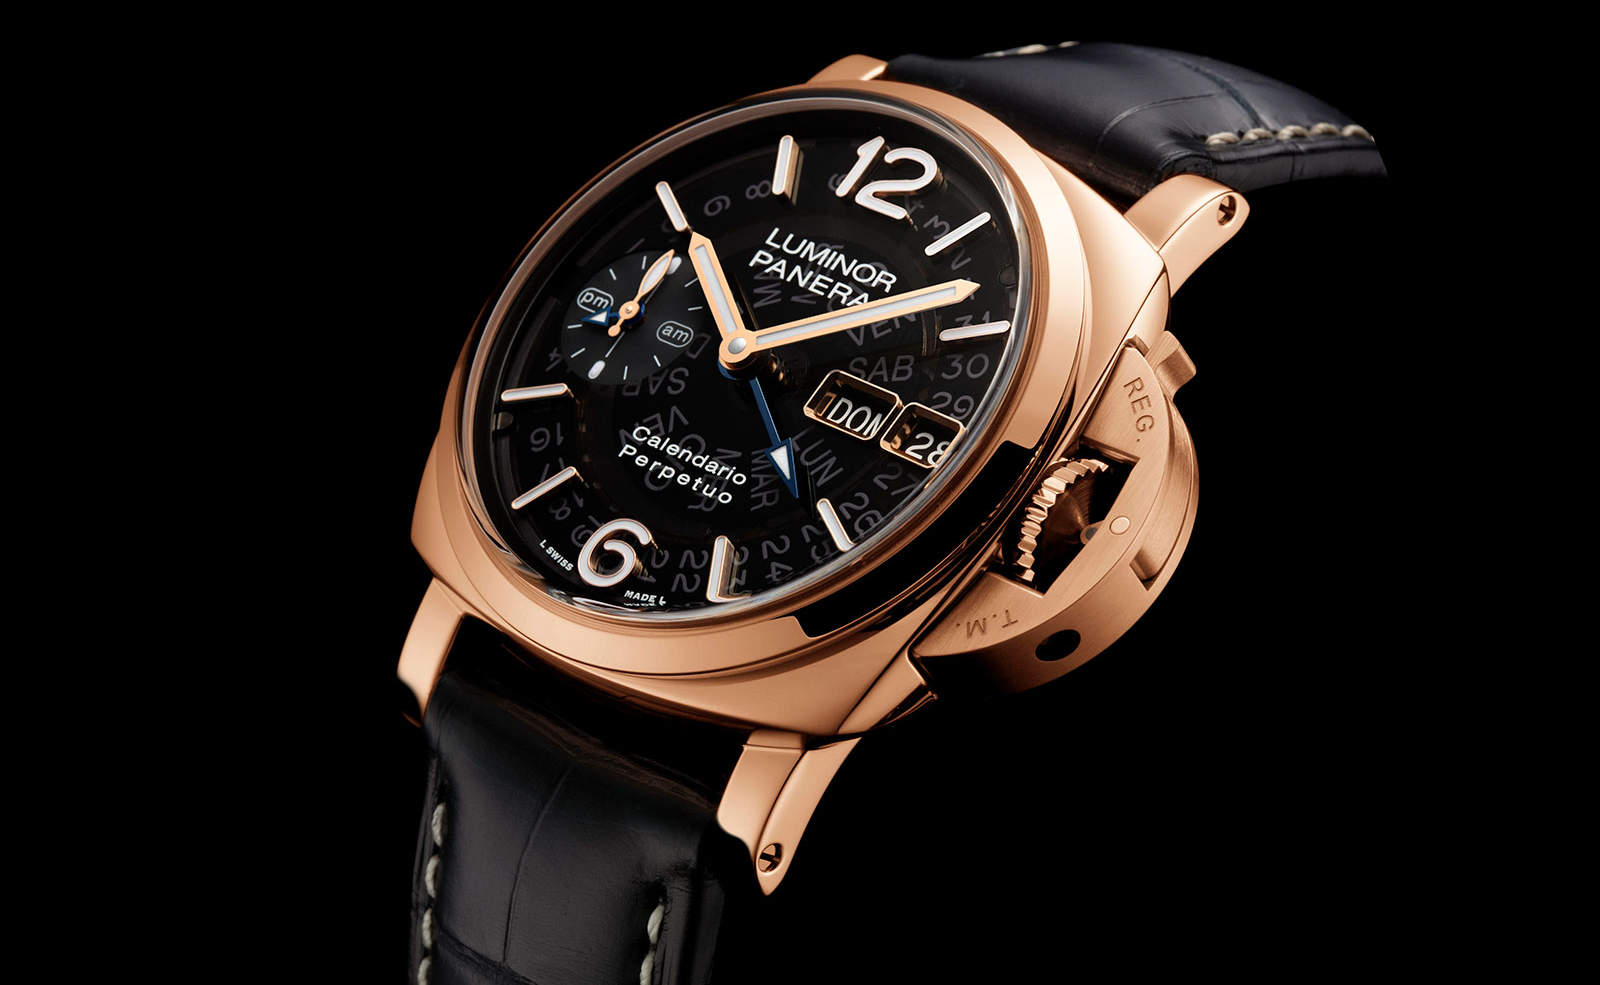 Panerai has launched the new Luminor Goldtech Calendario Perpetuo PAM01269 with an elegant tinted sapphire dial